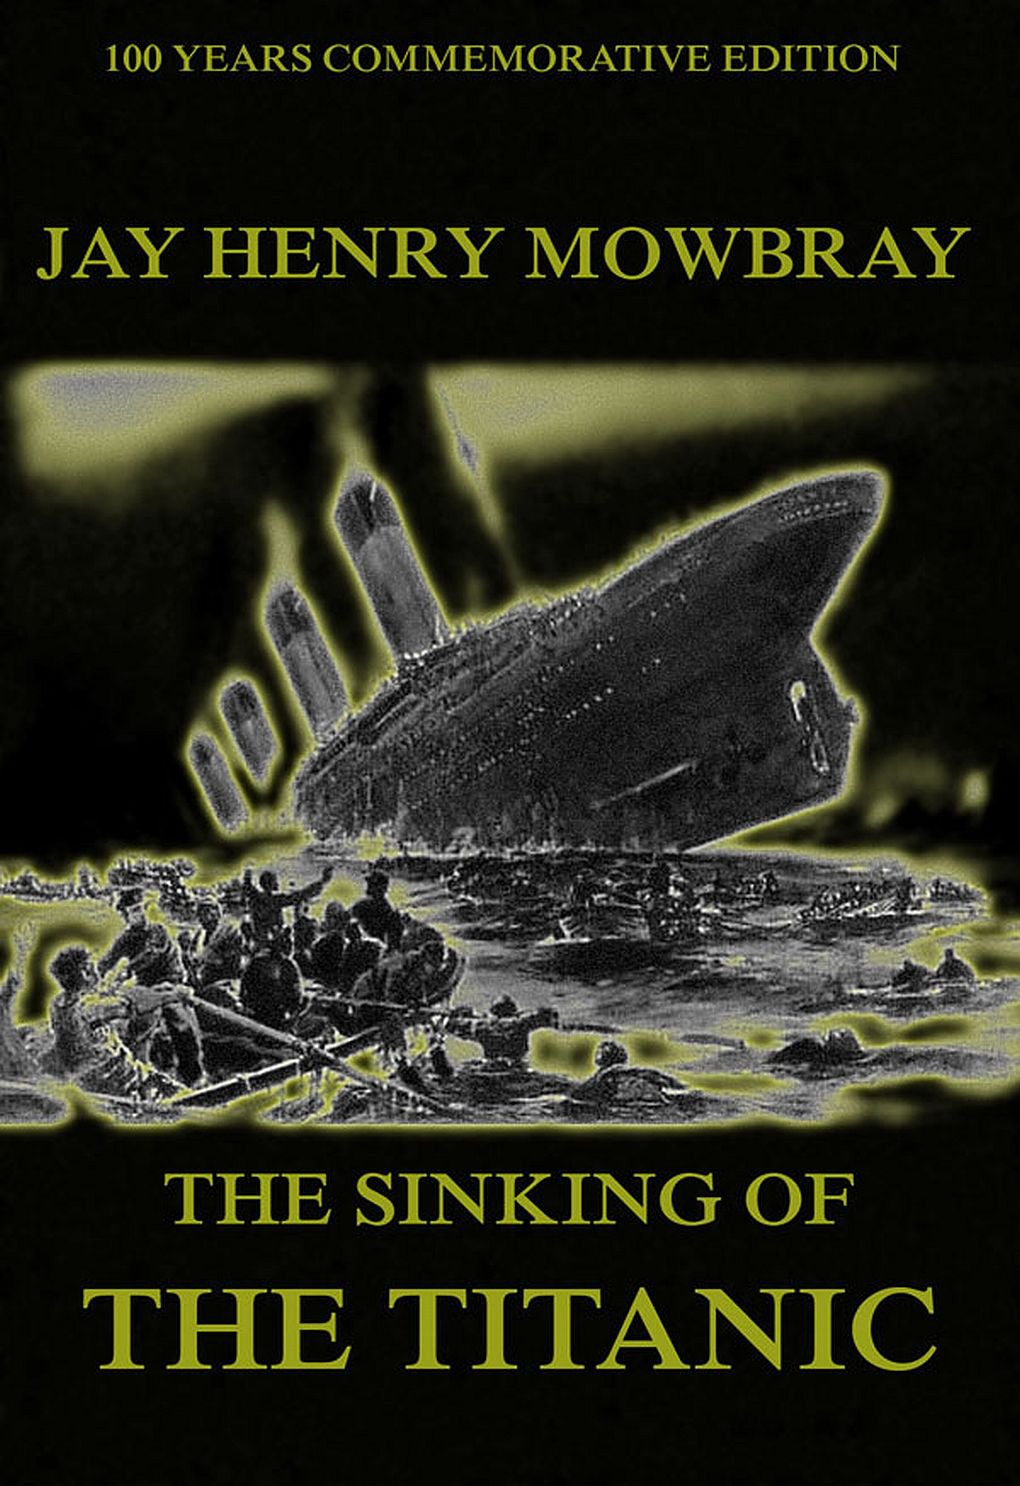 The Sinking Of The Titanic - Jay Henry Mowbray